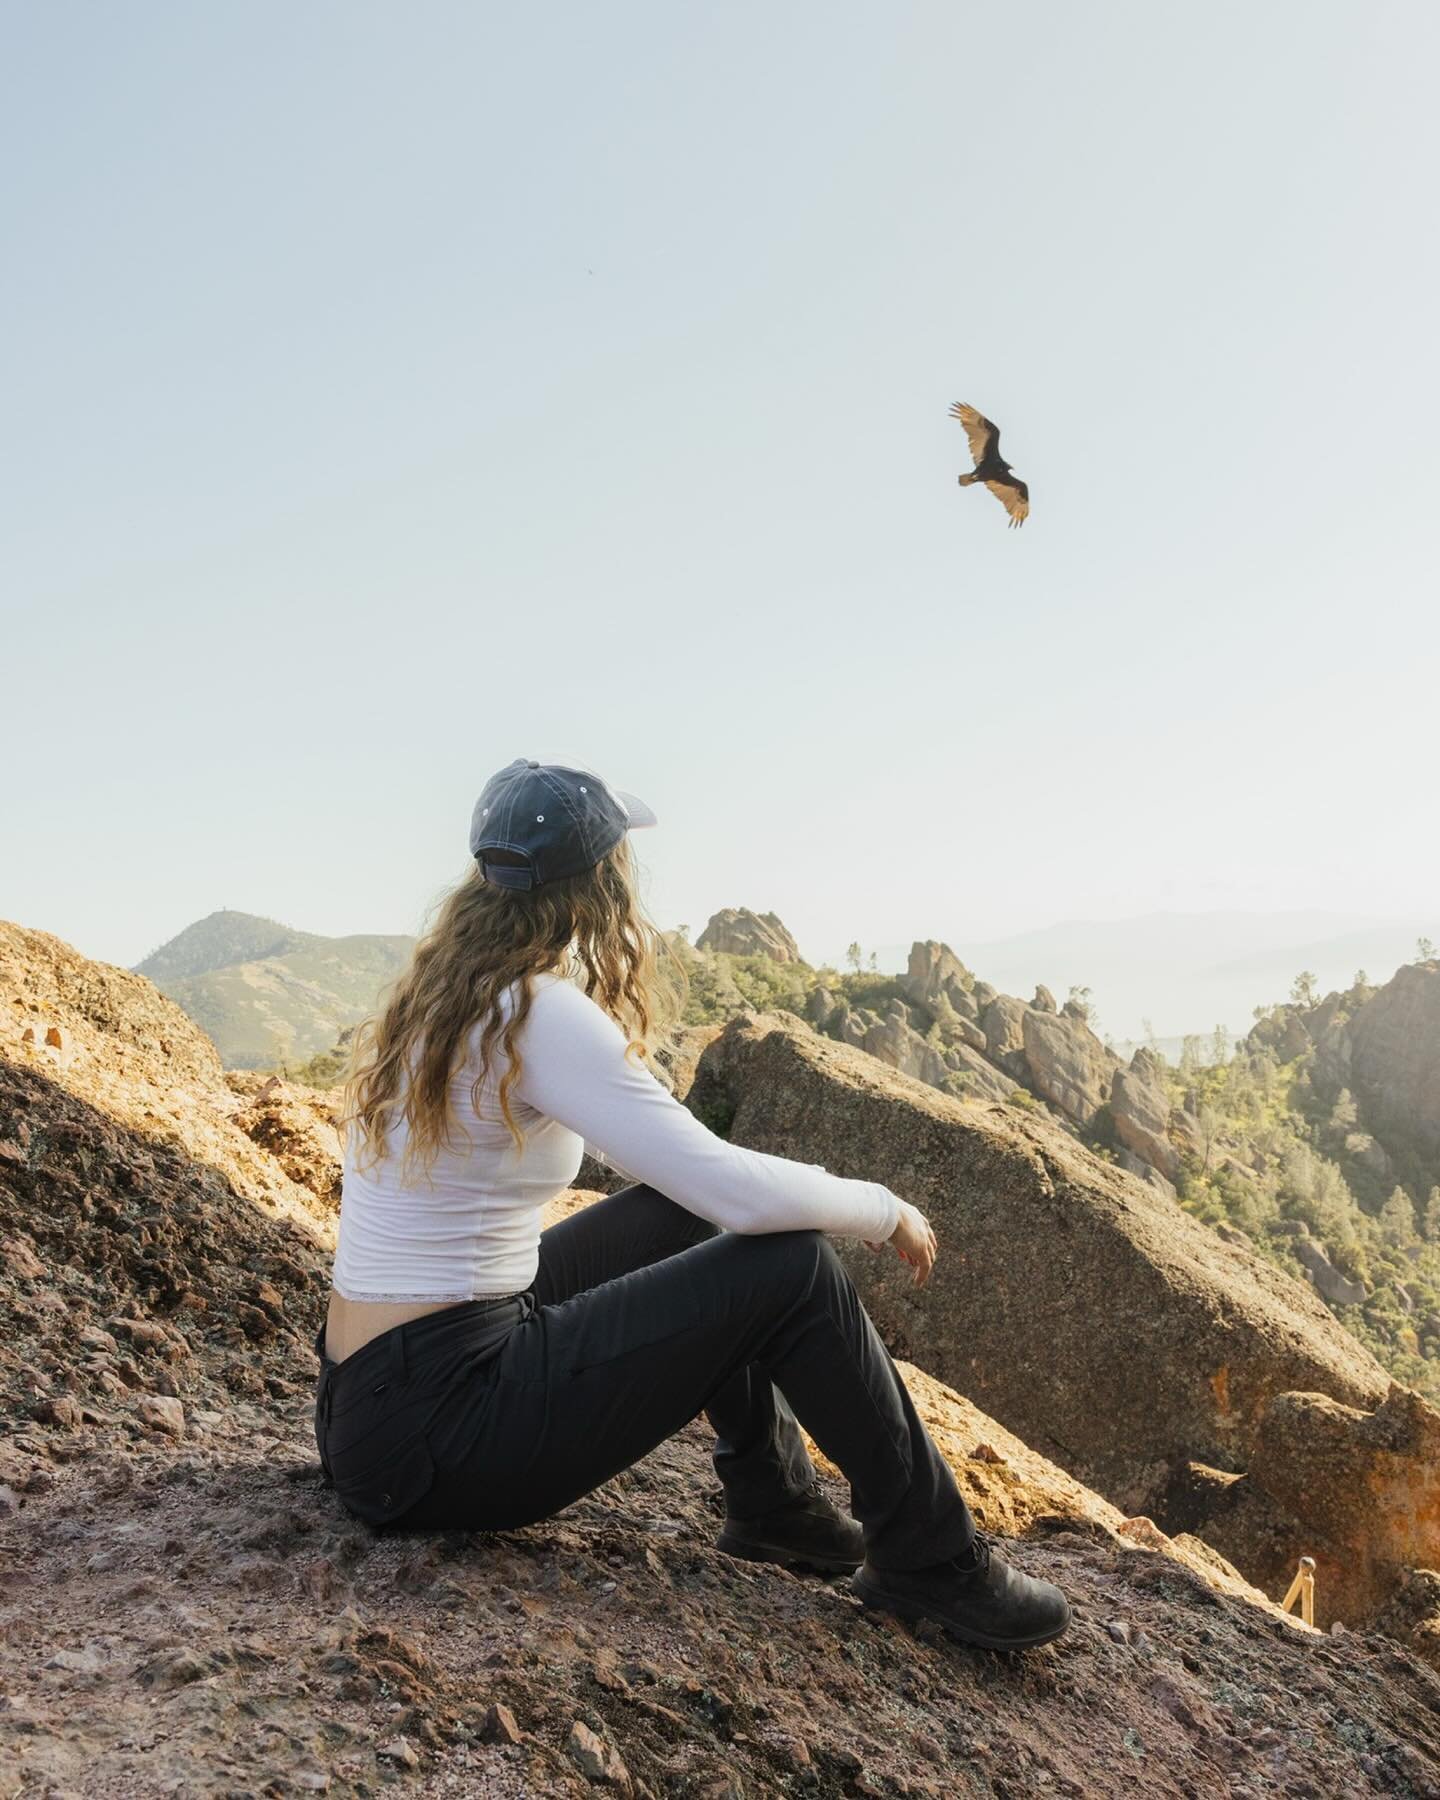 Is this the part where I talk about how I missed the perfect shot of a condor flying directly overhead and behind Molly?
Because I&rsquo;m still salty about it 😂
&bull;
I&rsquo;ve said it a lot, and I&rsquo;ll keep saying it - hikes are better with 